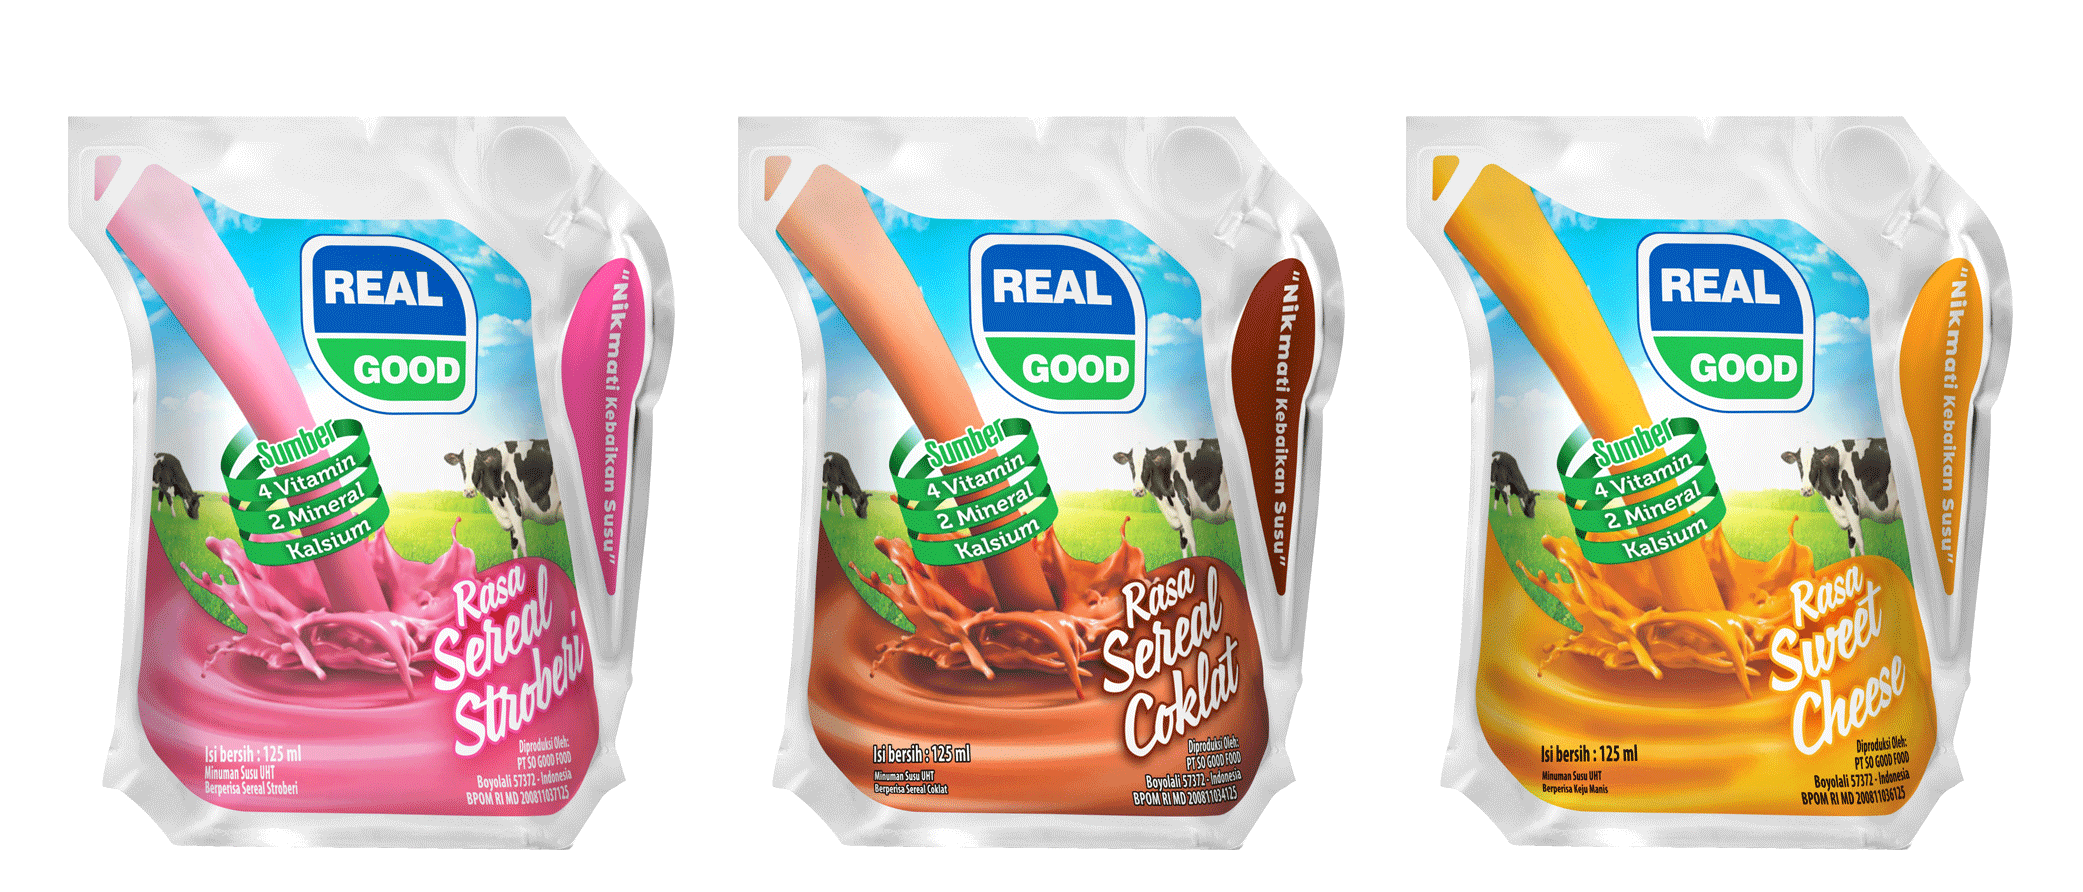 Download Real Good - Ecolean - a lighter approach to packaging